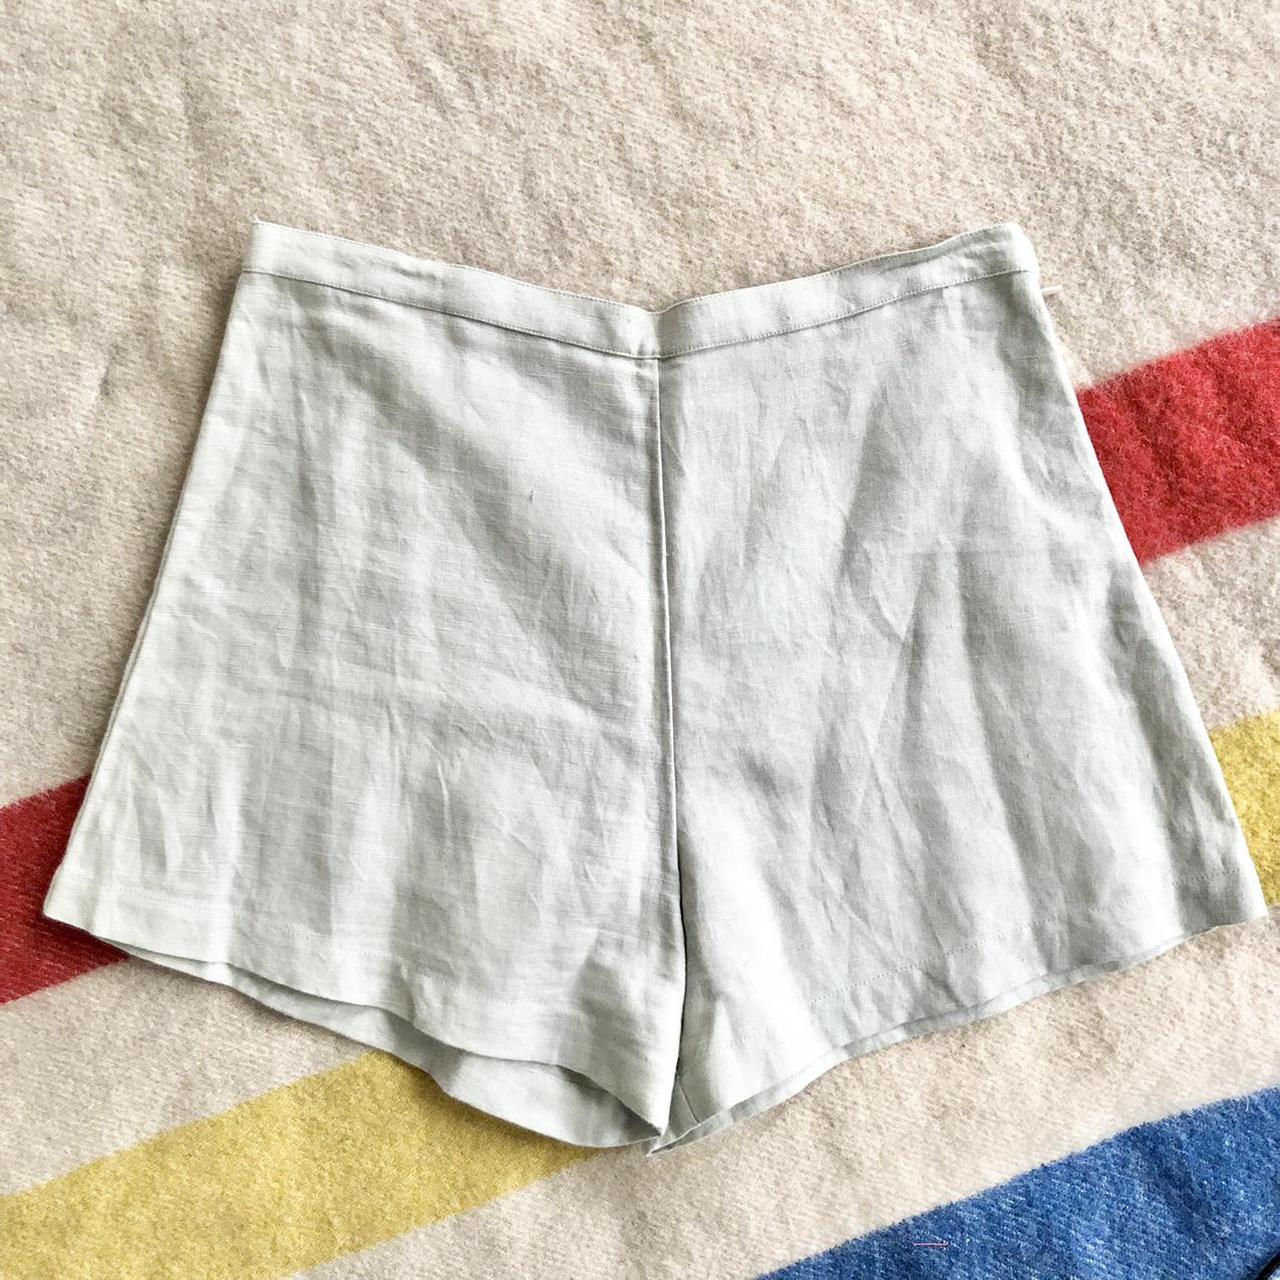 Product Image 2 - ALI GOLDEN shorts in sage!